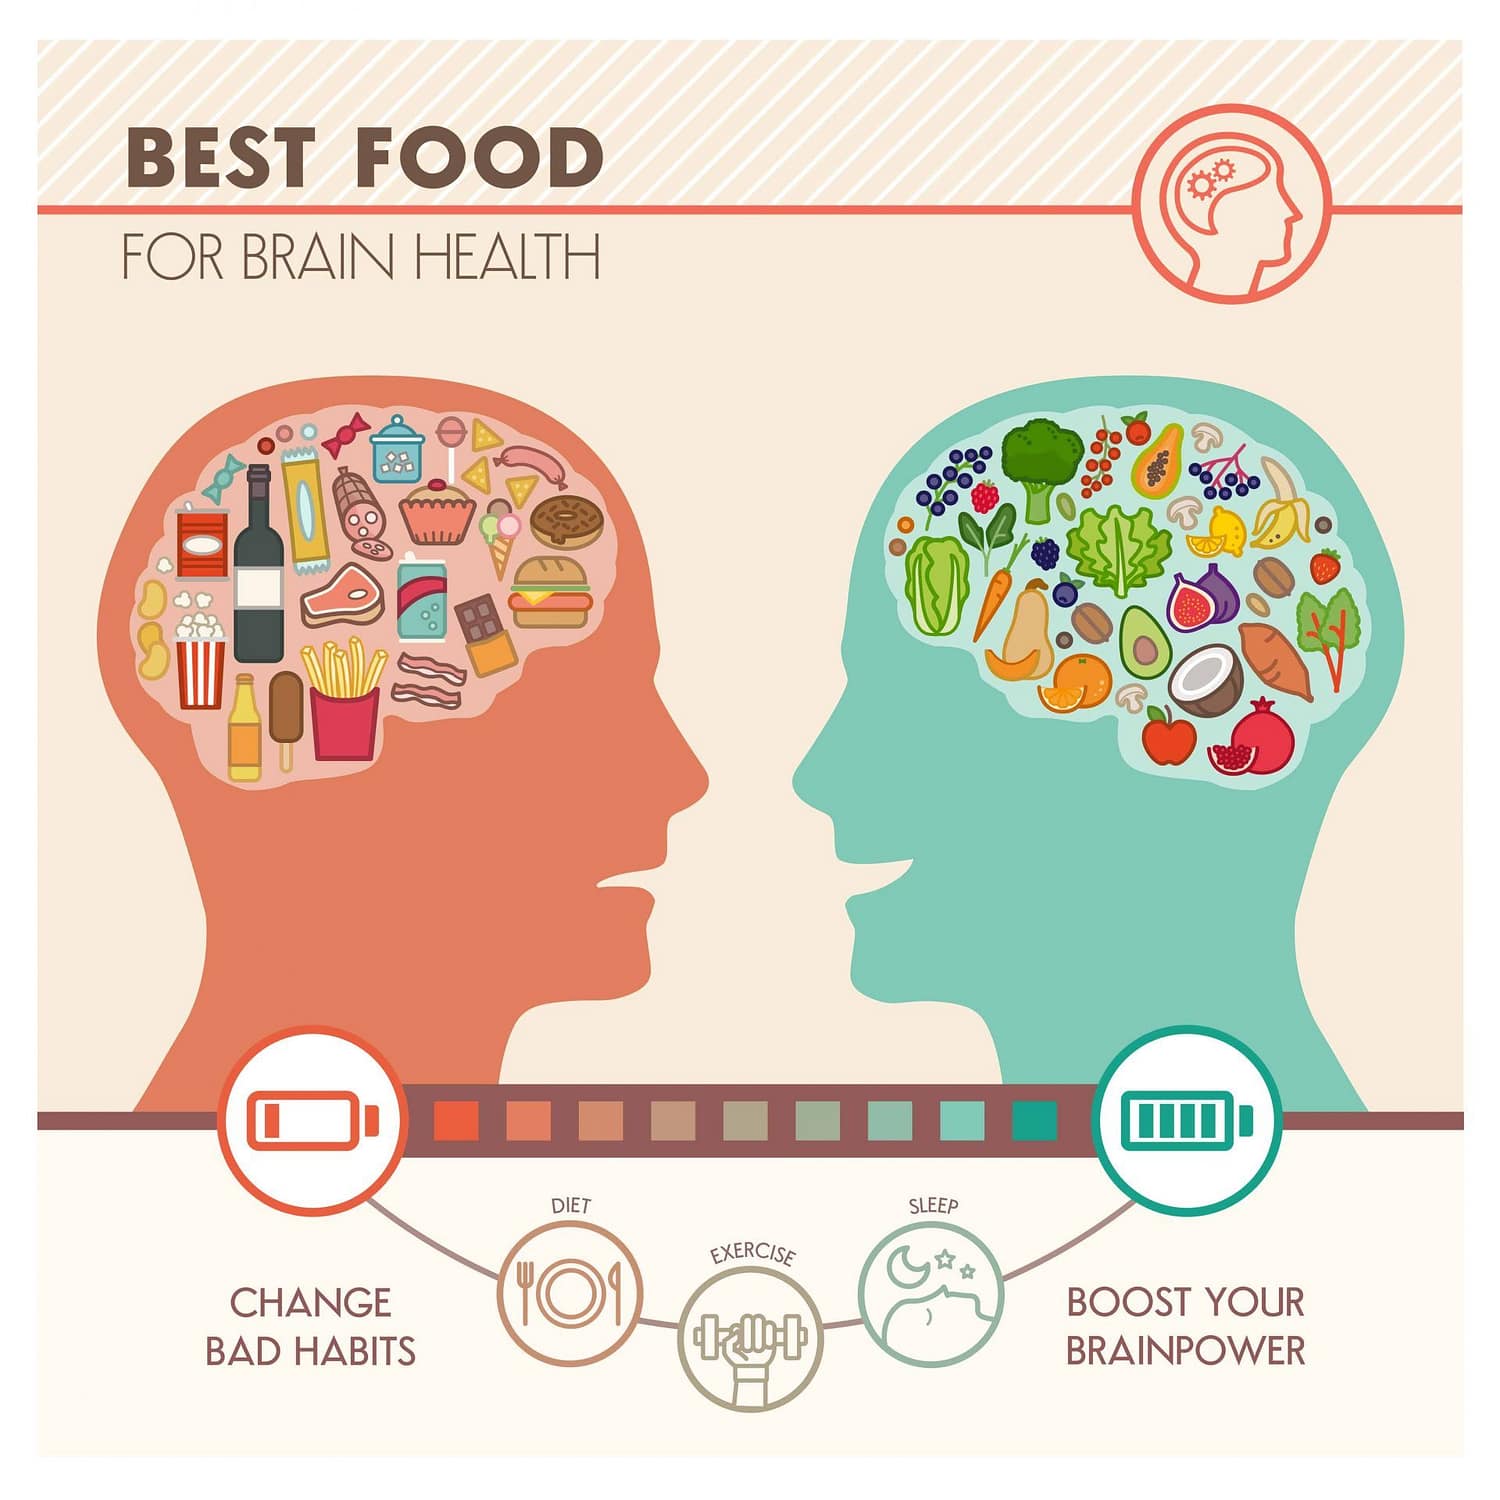 Best food for brain health infographic